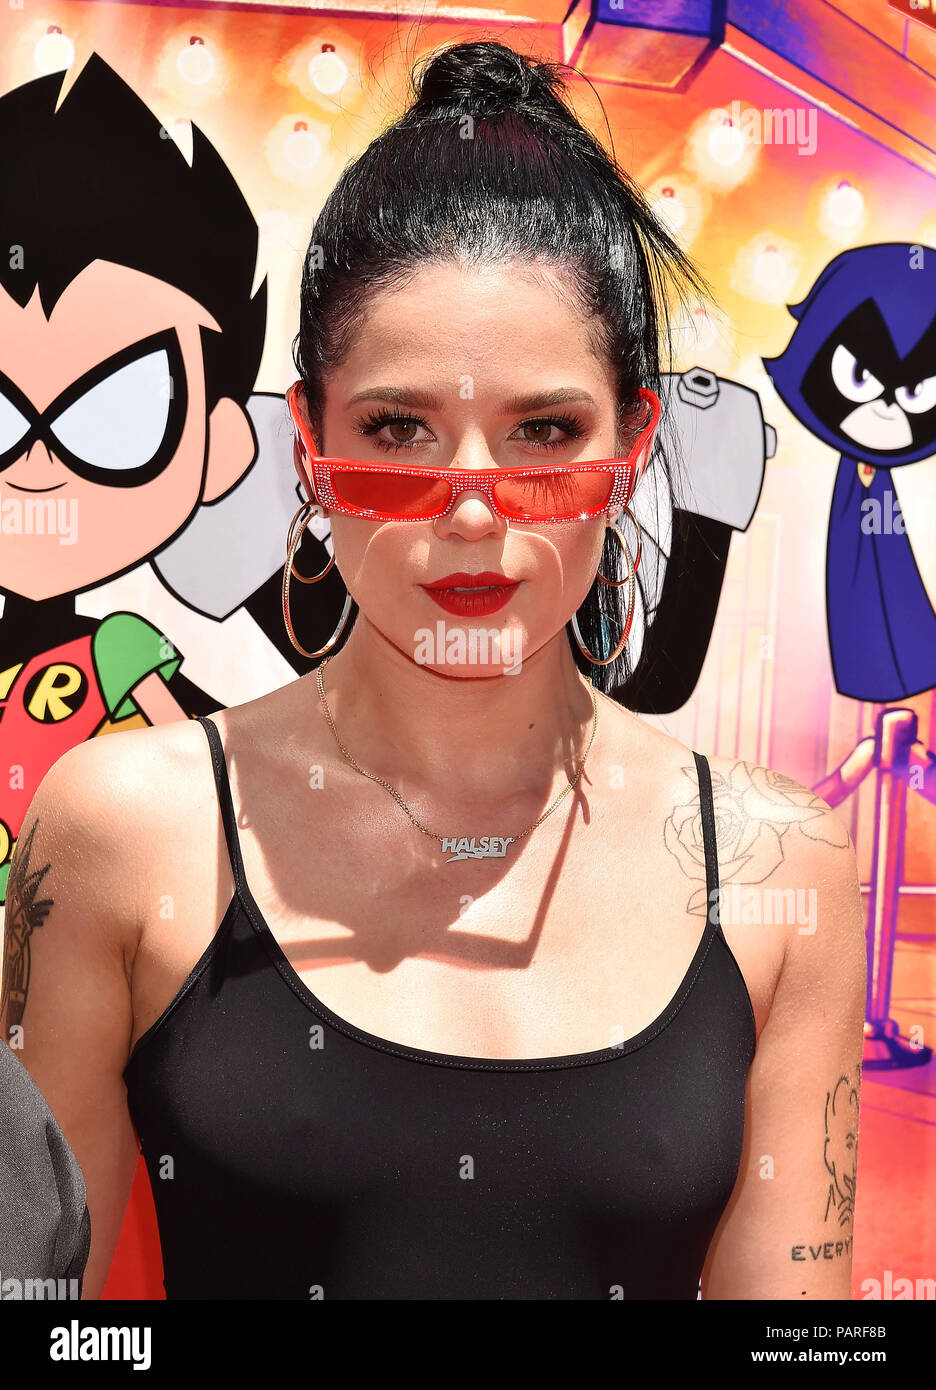 HOLLYWOOD, CA - JULY 22: Halsey  attends the premiere of Warner Bros. Animations' 'Teen Titans Go! To The Movies' TCL Chinese Theatre on July 22, 2018 in Hollywood, California. Stock Photo